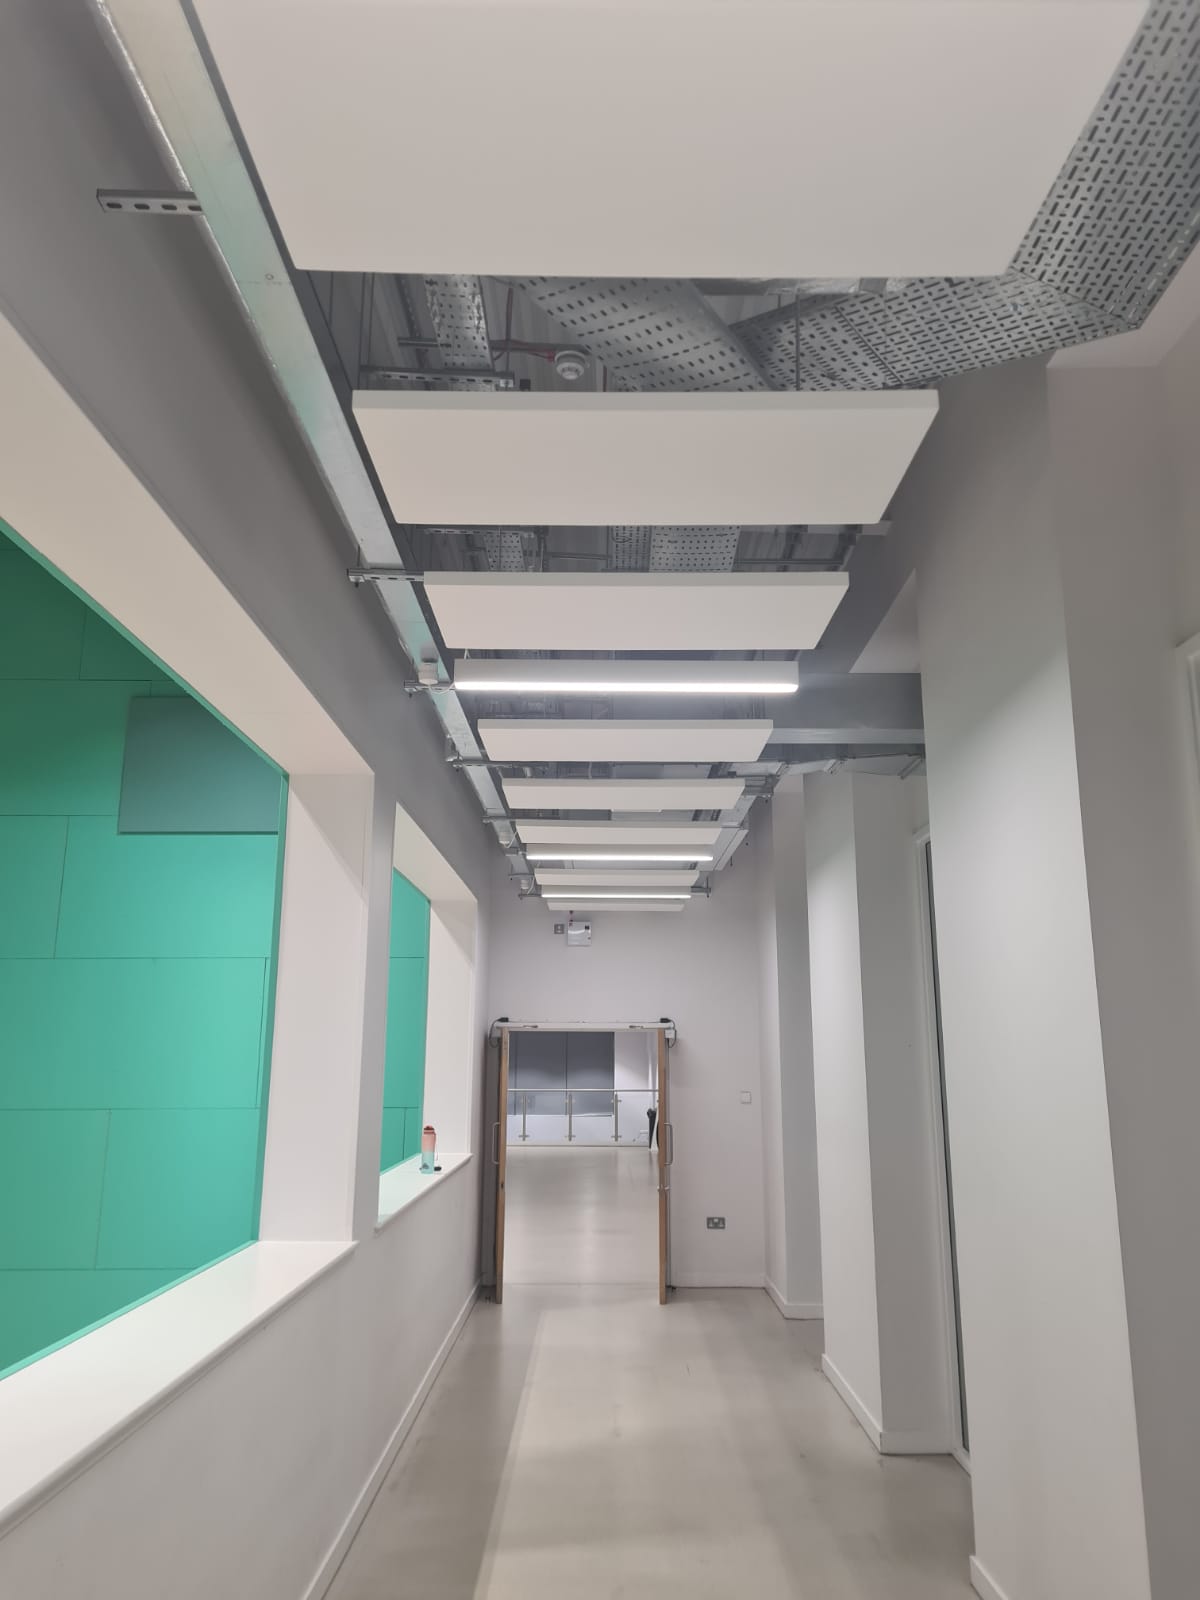 300W panels integrated into a suspended ceiling grid